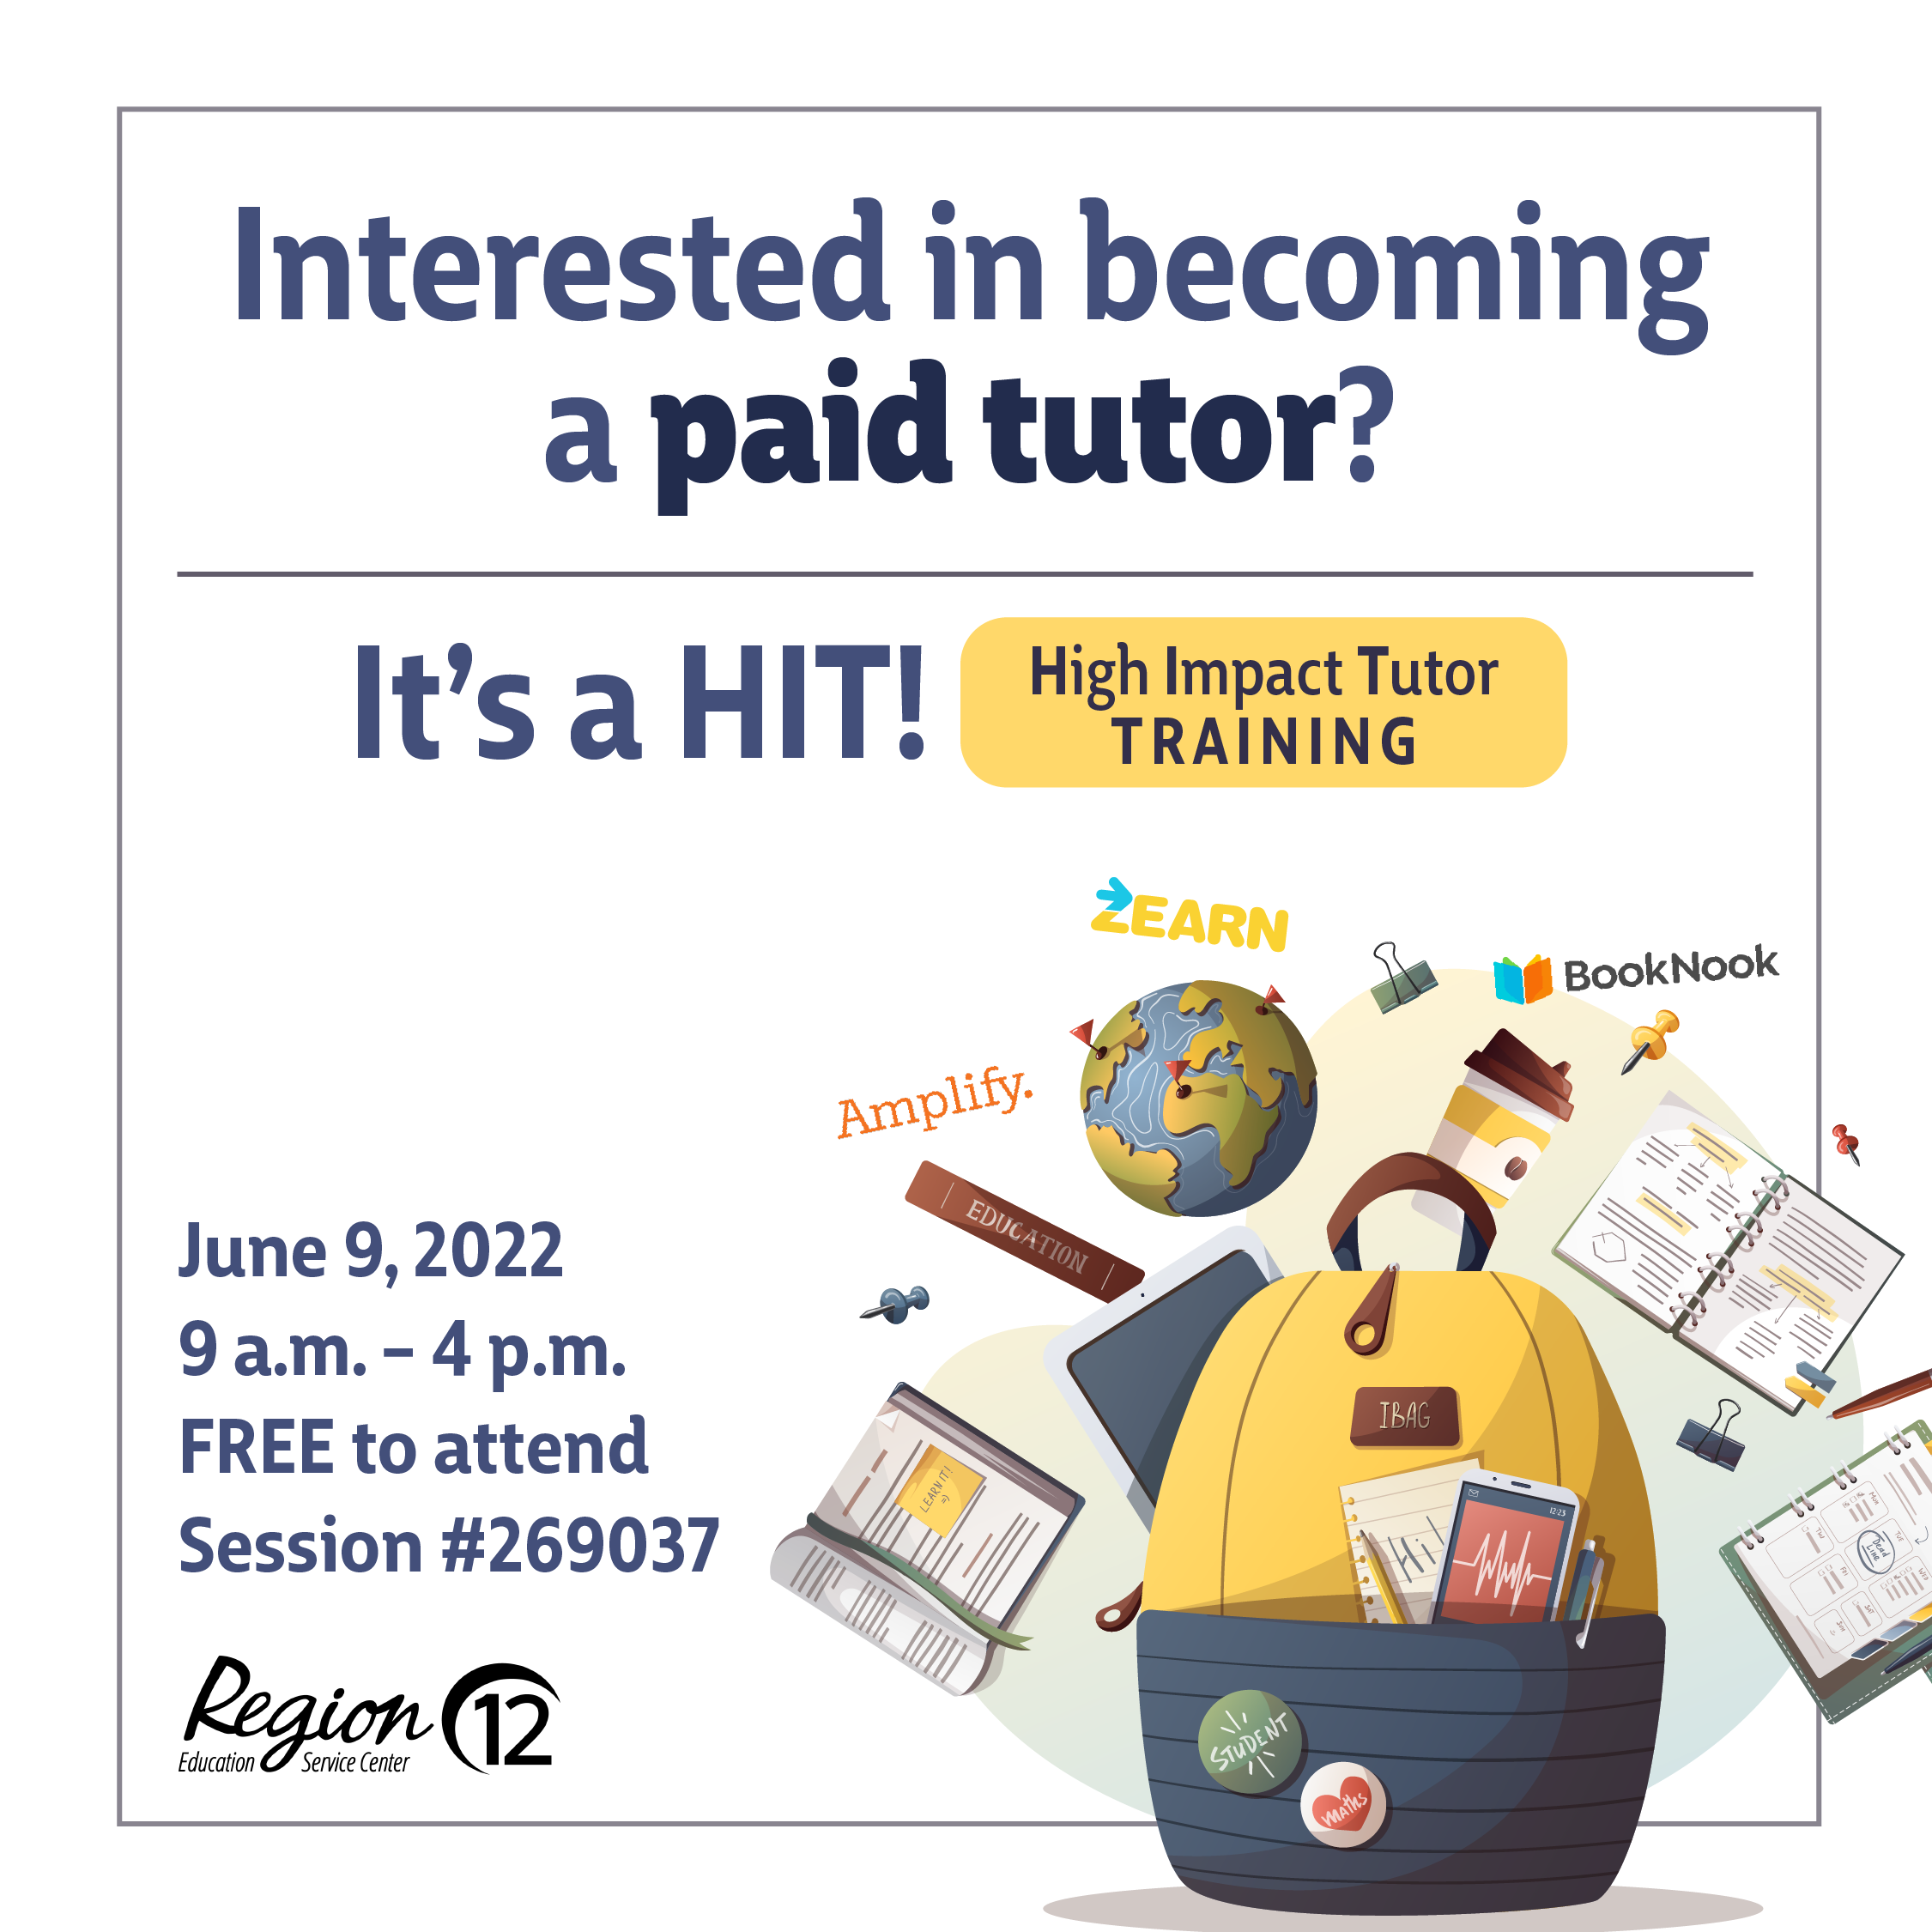 Interested in becoming a paid tutor? It's a HIT! High Impact Tutor Training, June 9, 9a-4p, Free to attend